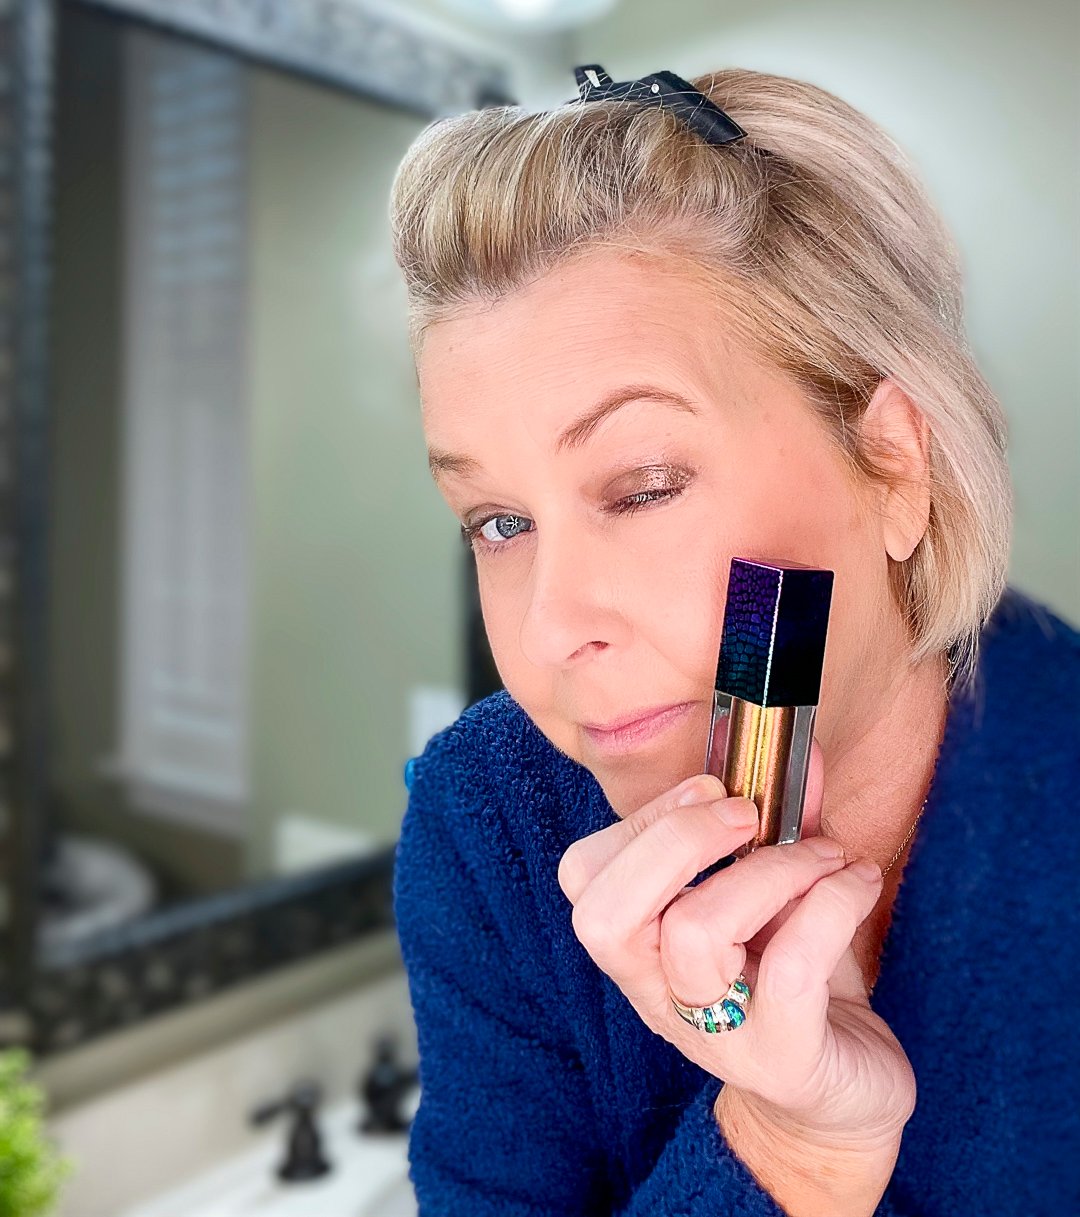 Over 40 Fashion Blogger, Tania Stephens is trying products from Walmart Beauty for August 2022 10